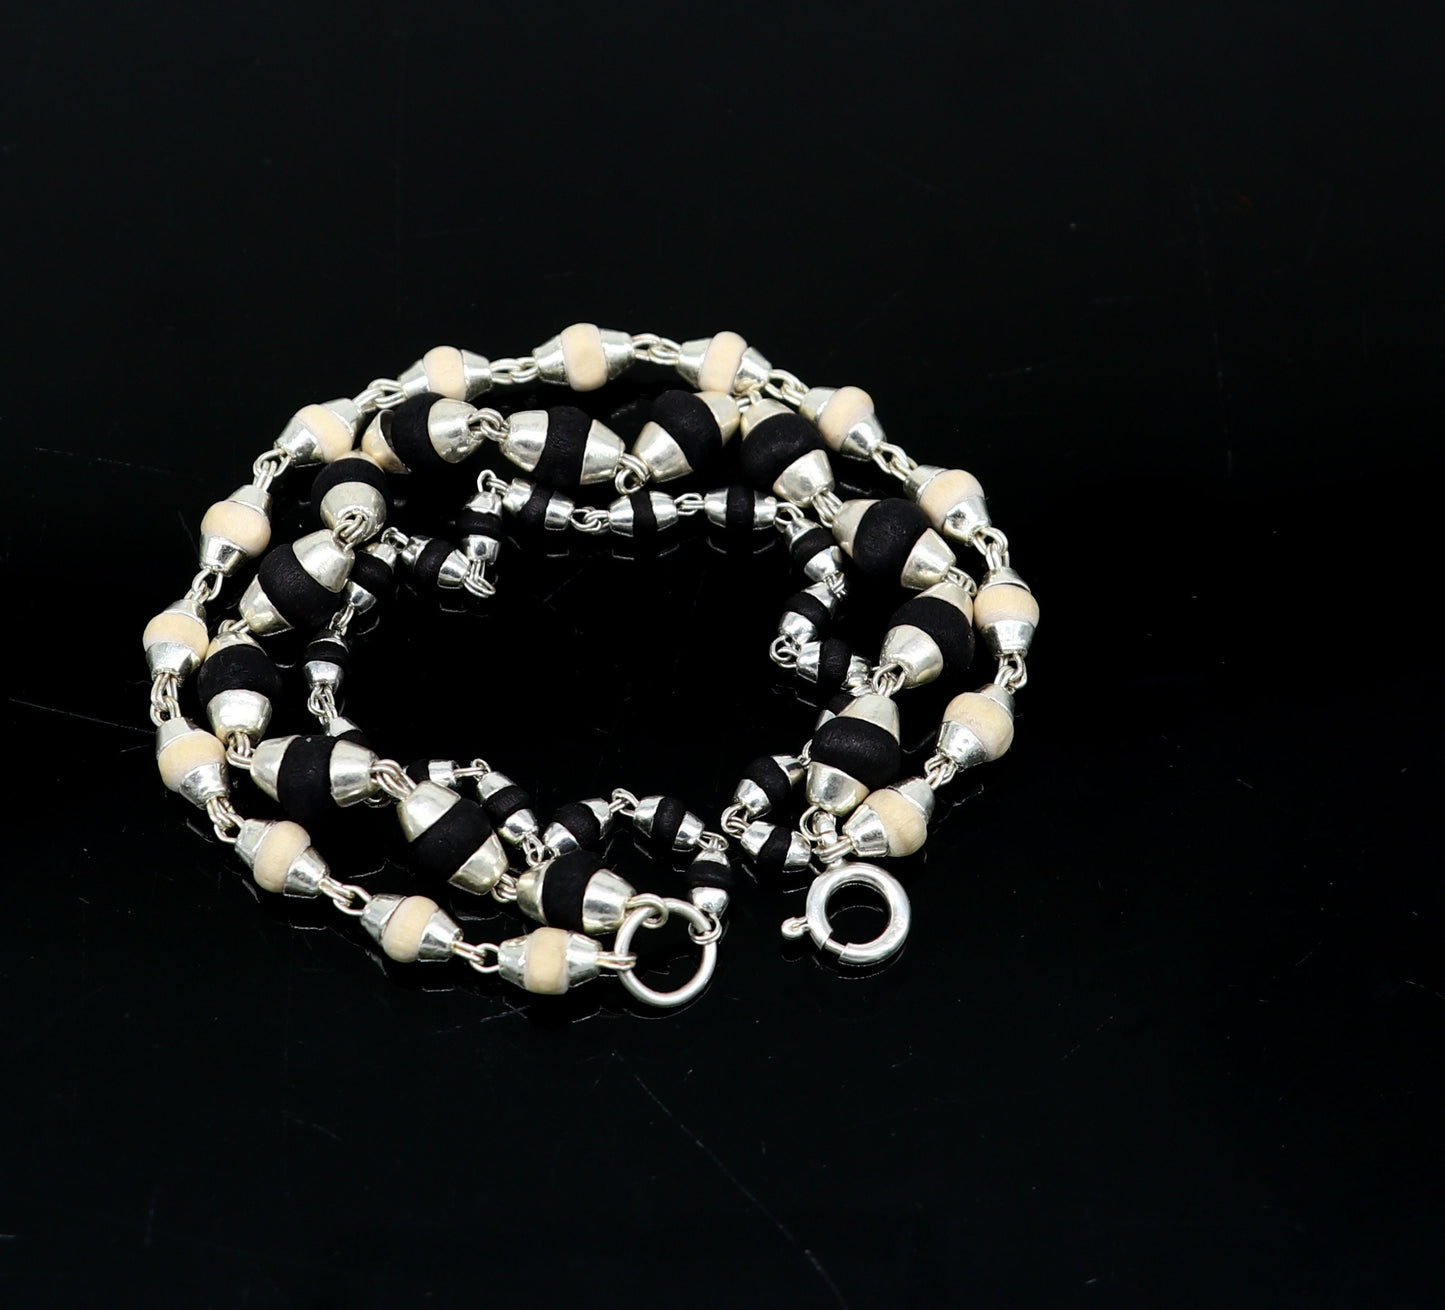 Black and white holy basil rosary plant /tulsi plant wood beaded Sterling silver handmade fabulous 3 line bracelet jewelry India sbr264 - TRIBAL ORNAMENTS